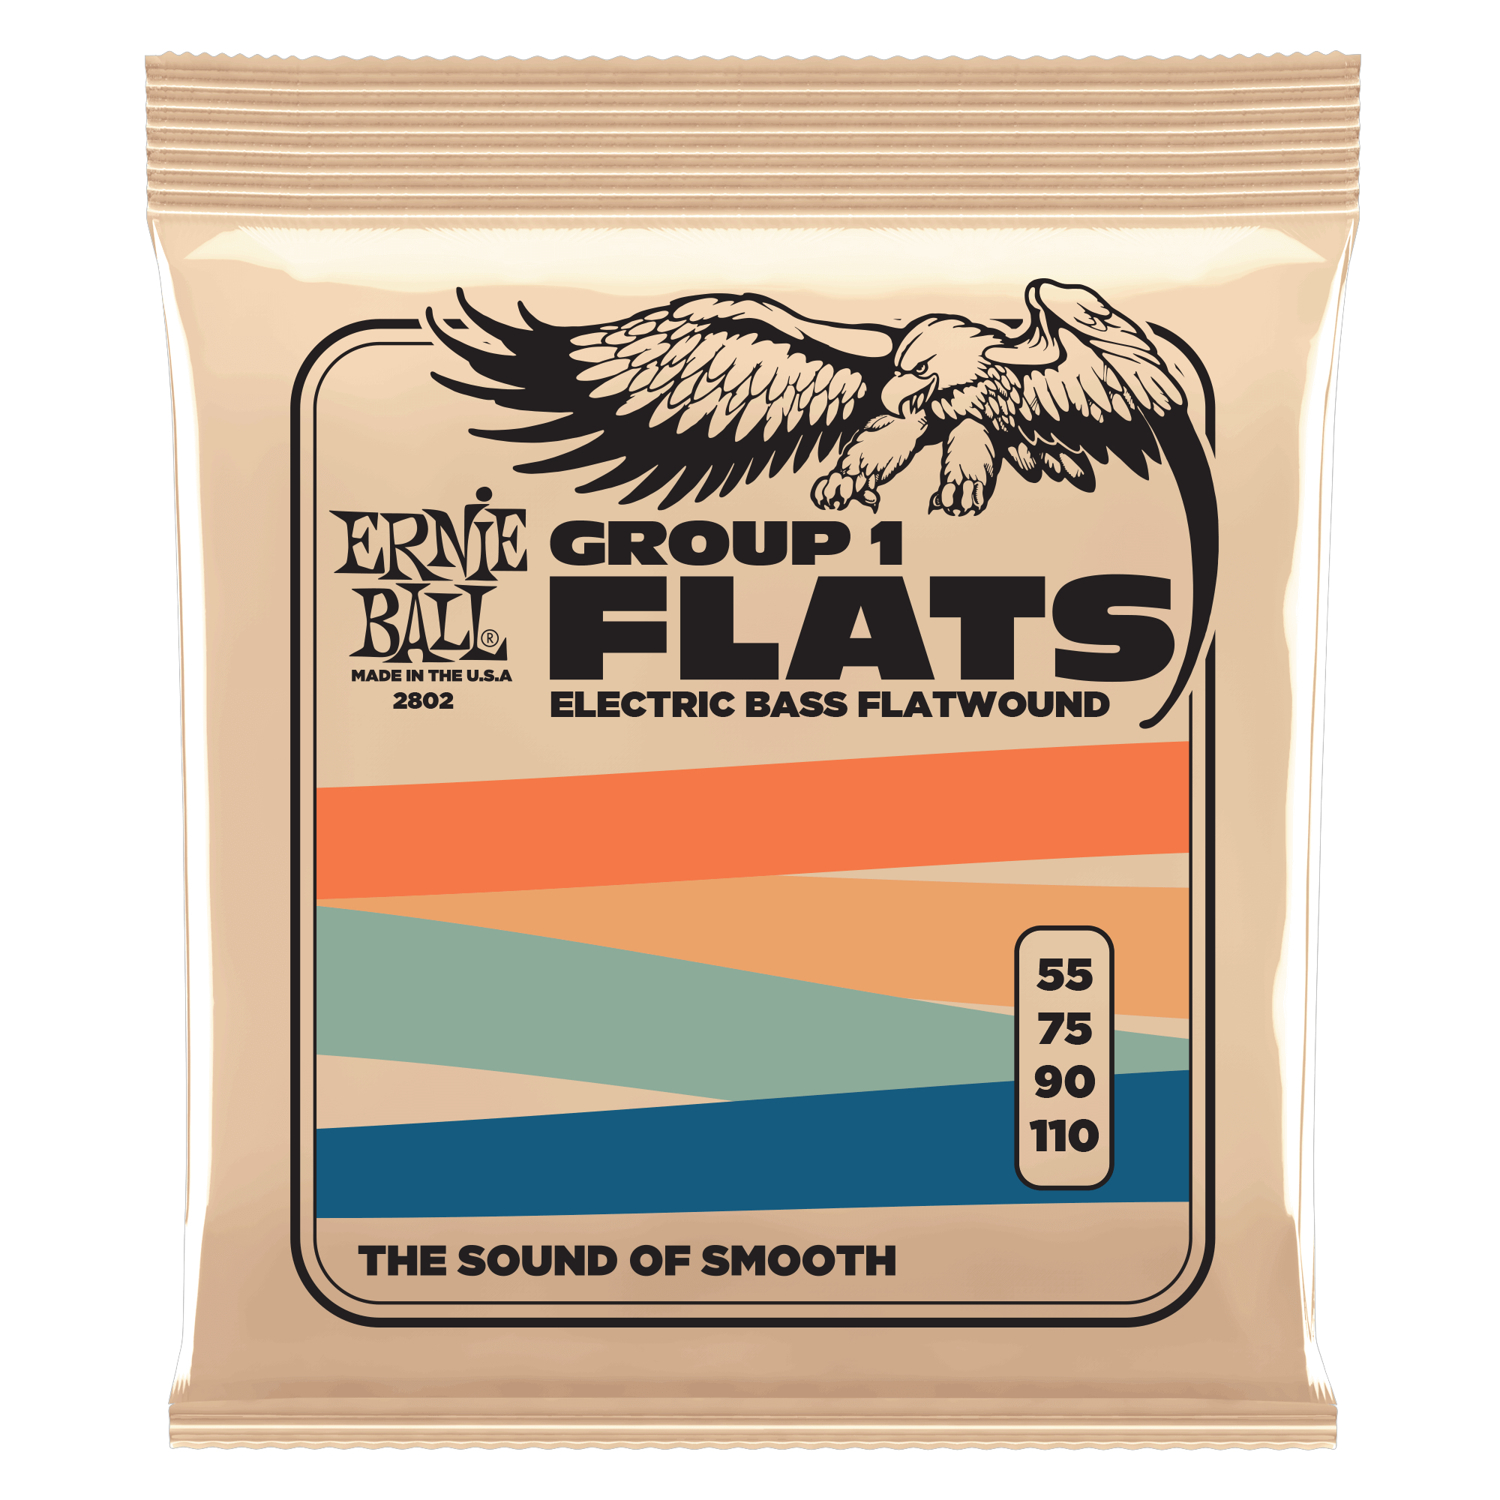 FLAT WOUND BASS Strings #2802 Group I